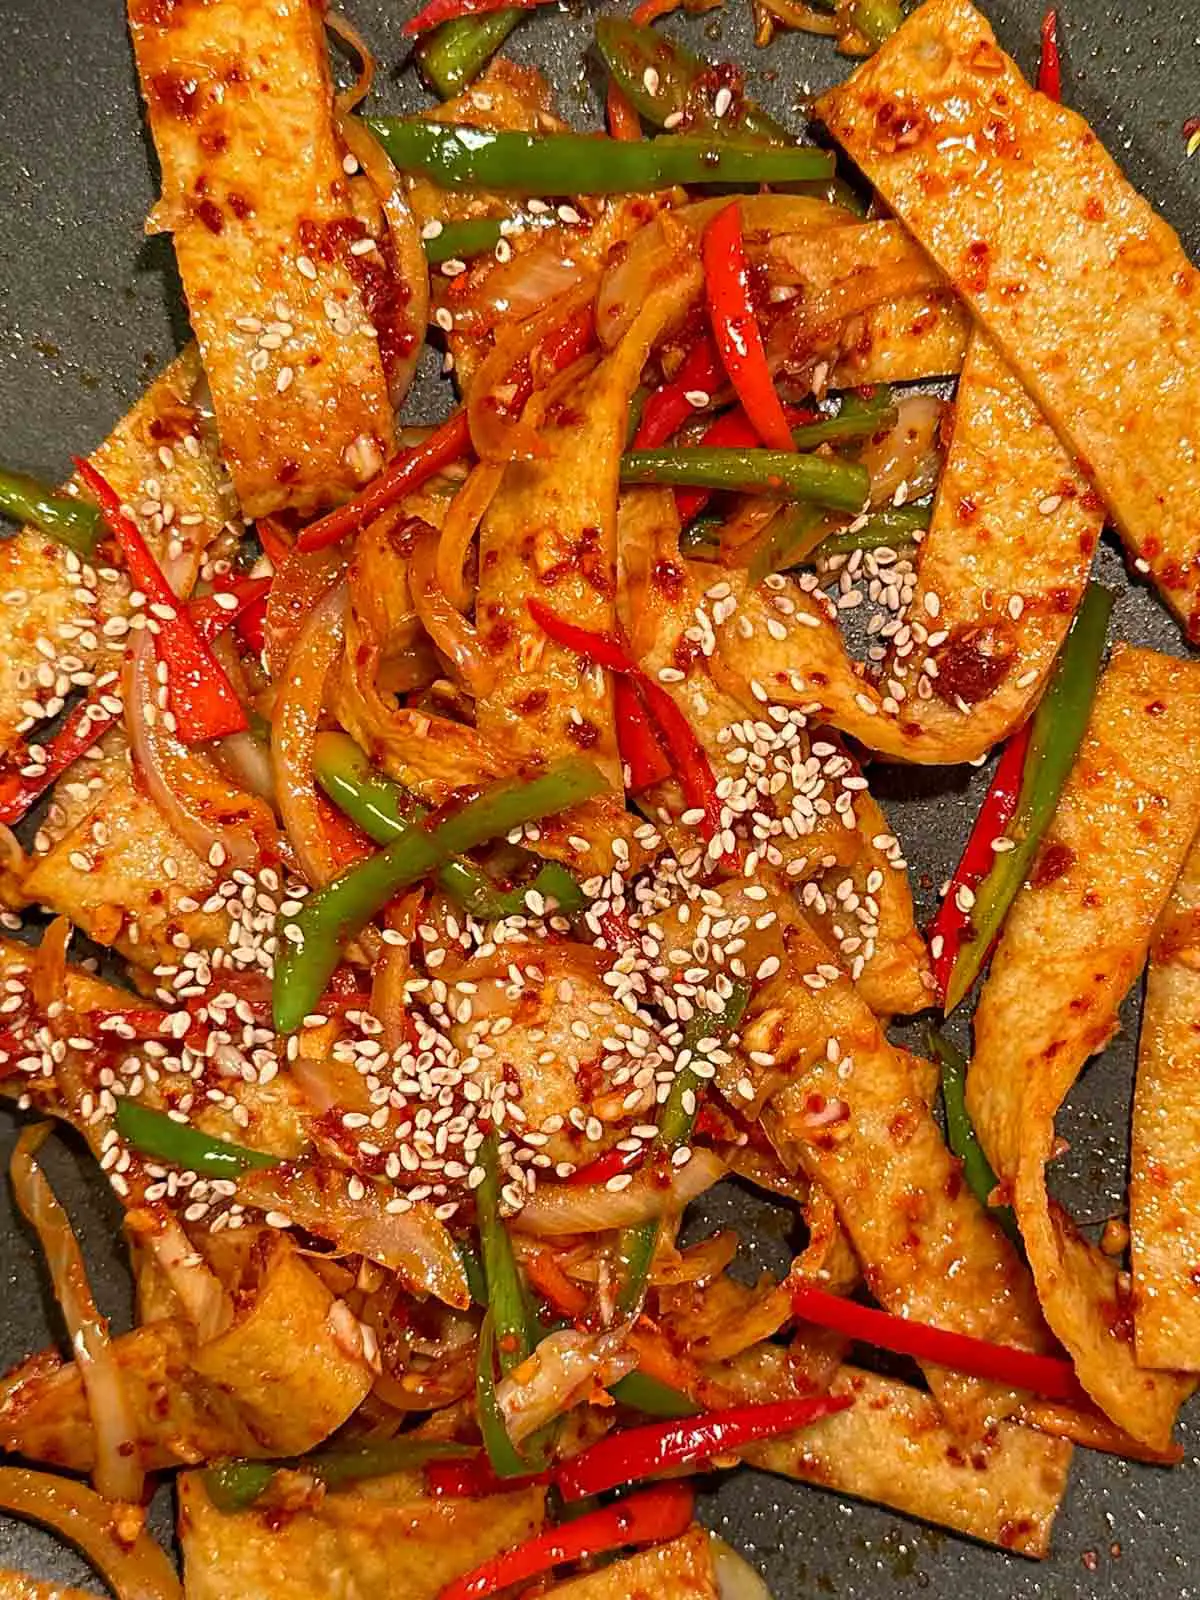 Korean fish cake that has been stir fried with onion and slivers of green and red peppers garnished with sesame seeds.